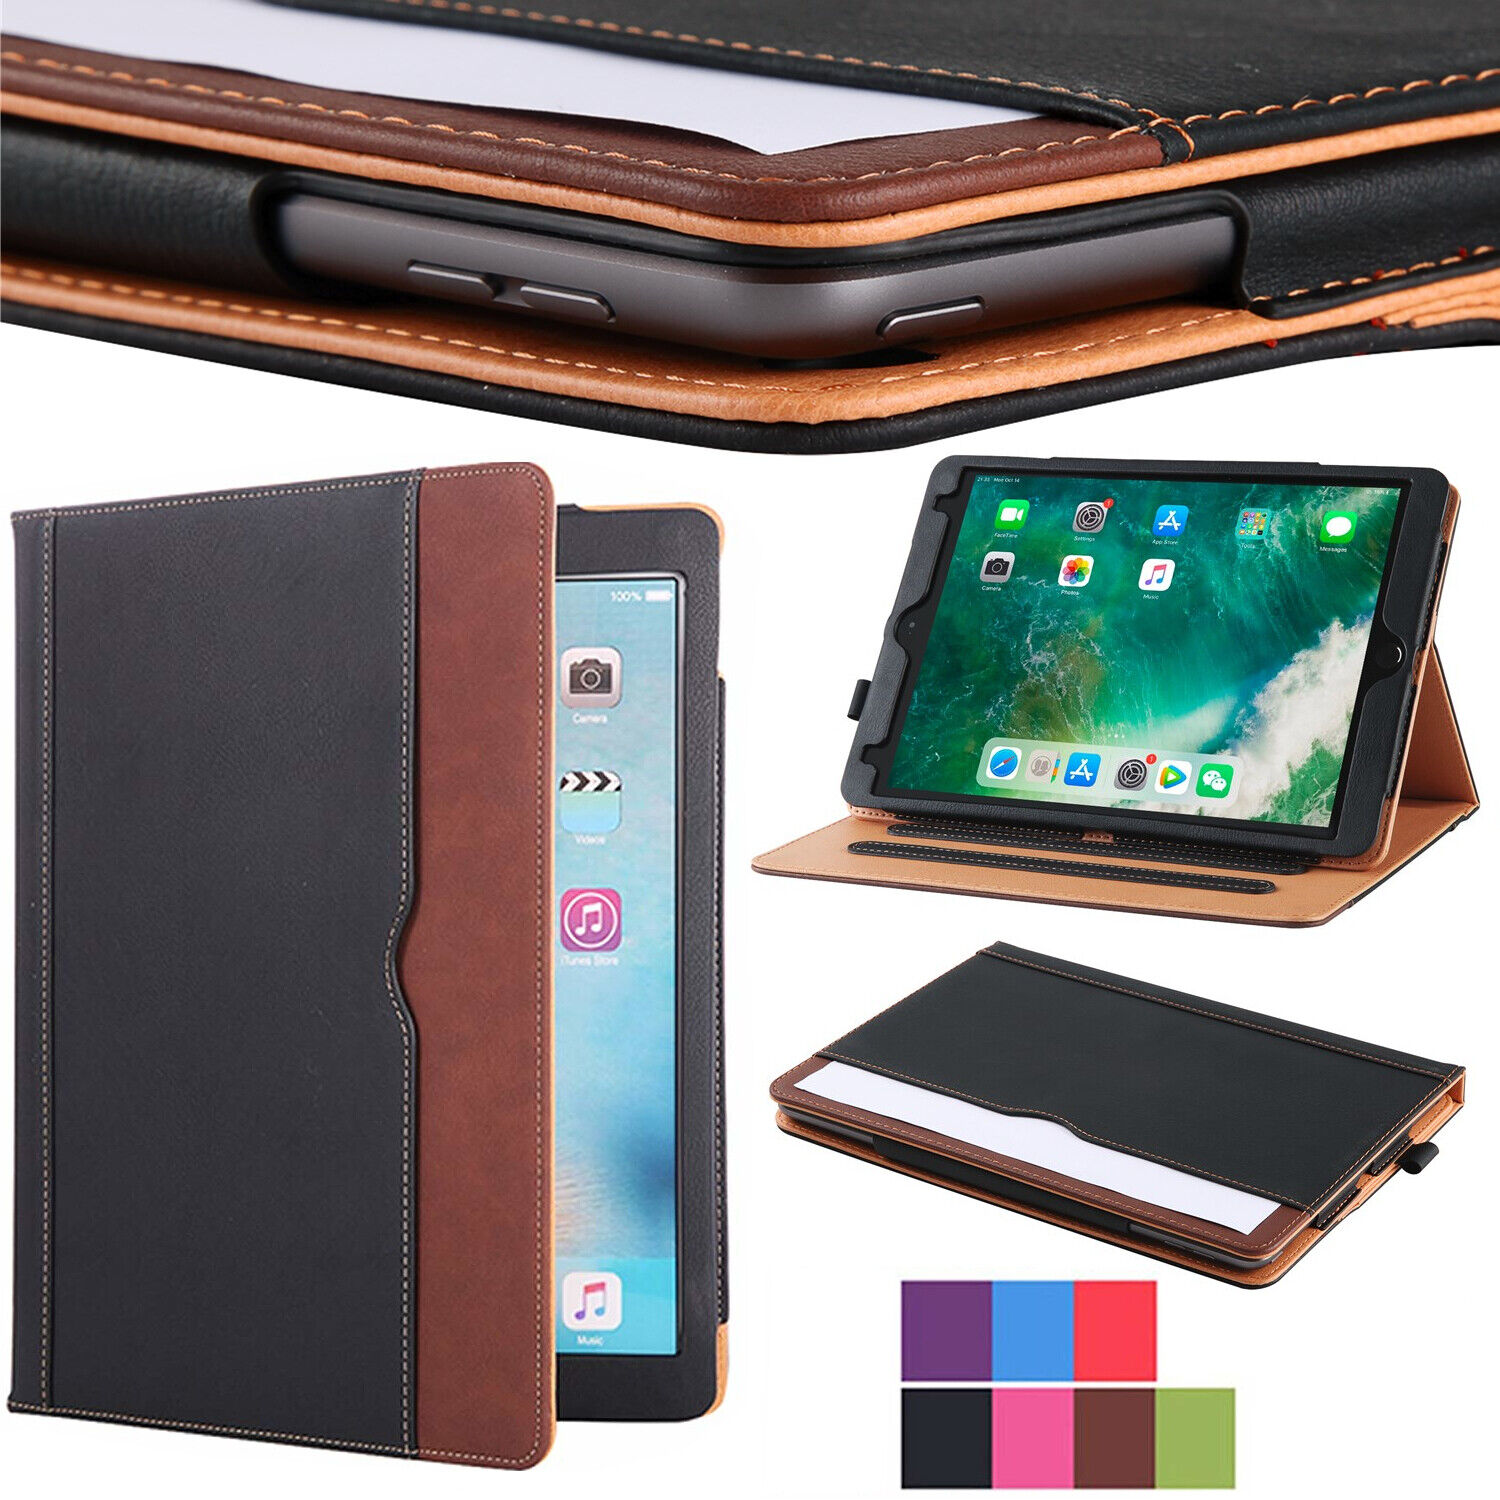 Soft Leather iPad Case Smart Cover Folio Stand For Apple Air 5th Gen 10.9\